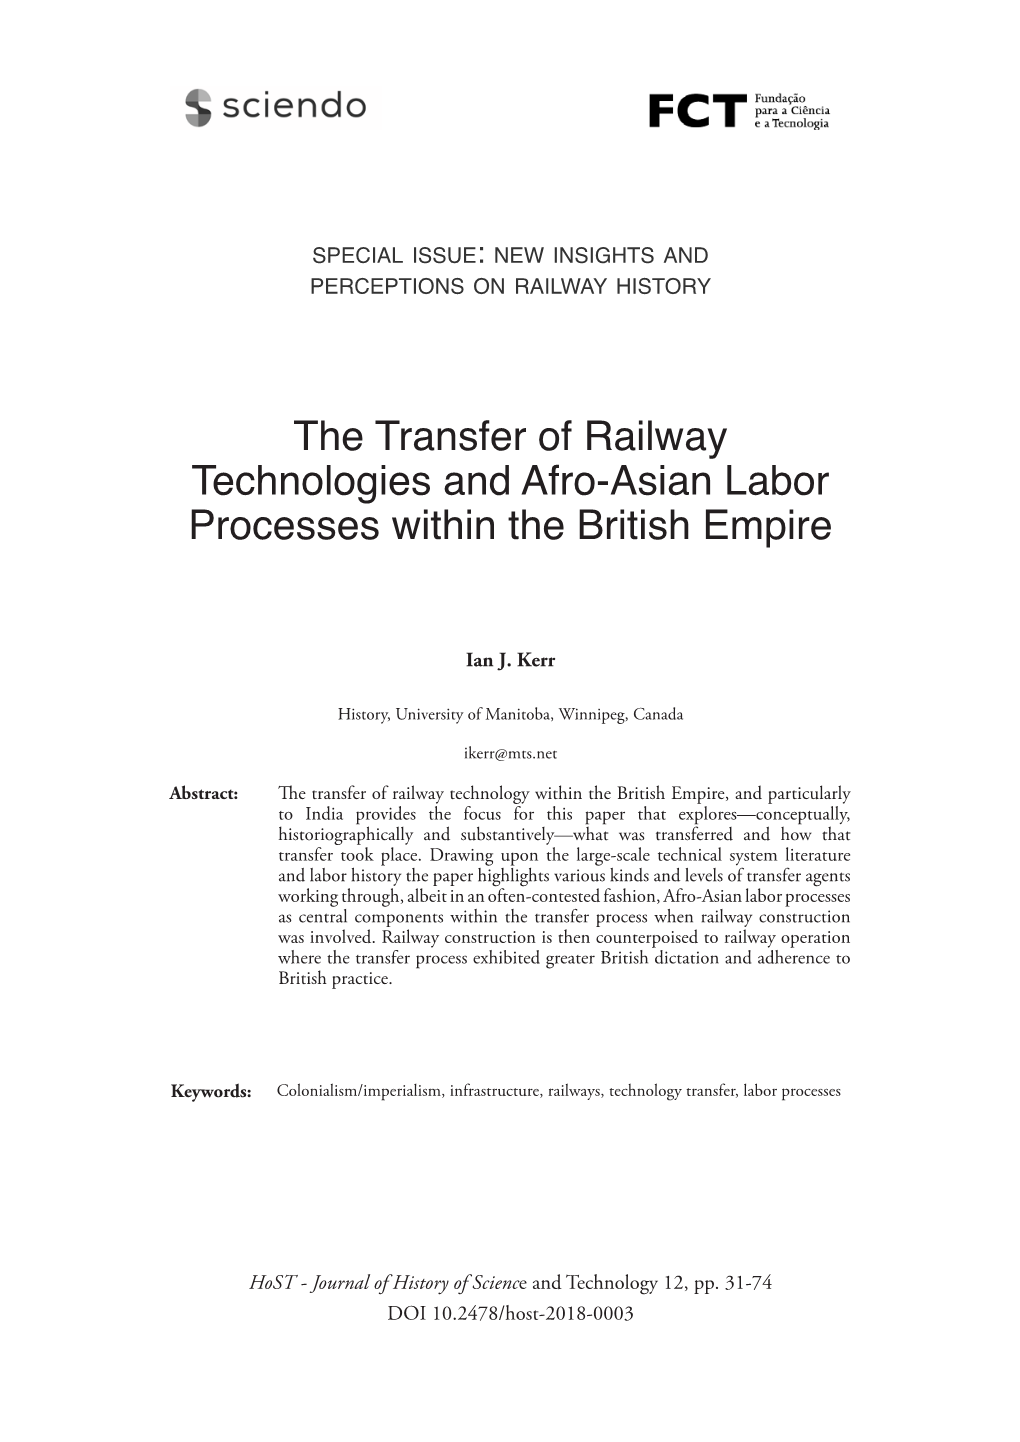 The Transfer of Railway Technologies and Afro-Asian Labor Processes Within the British Empire